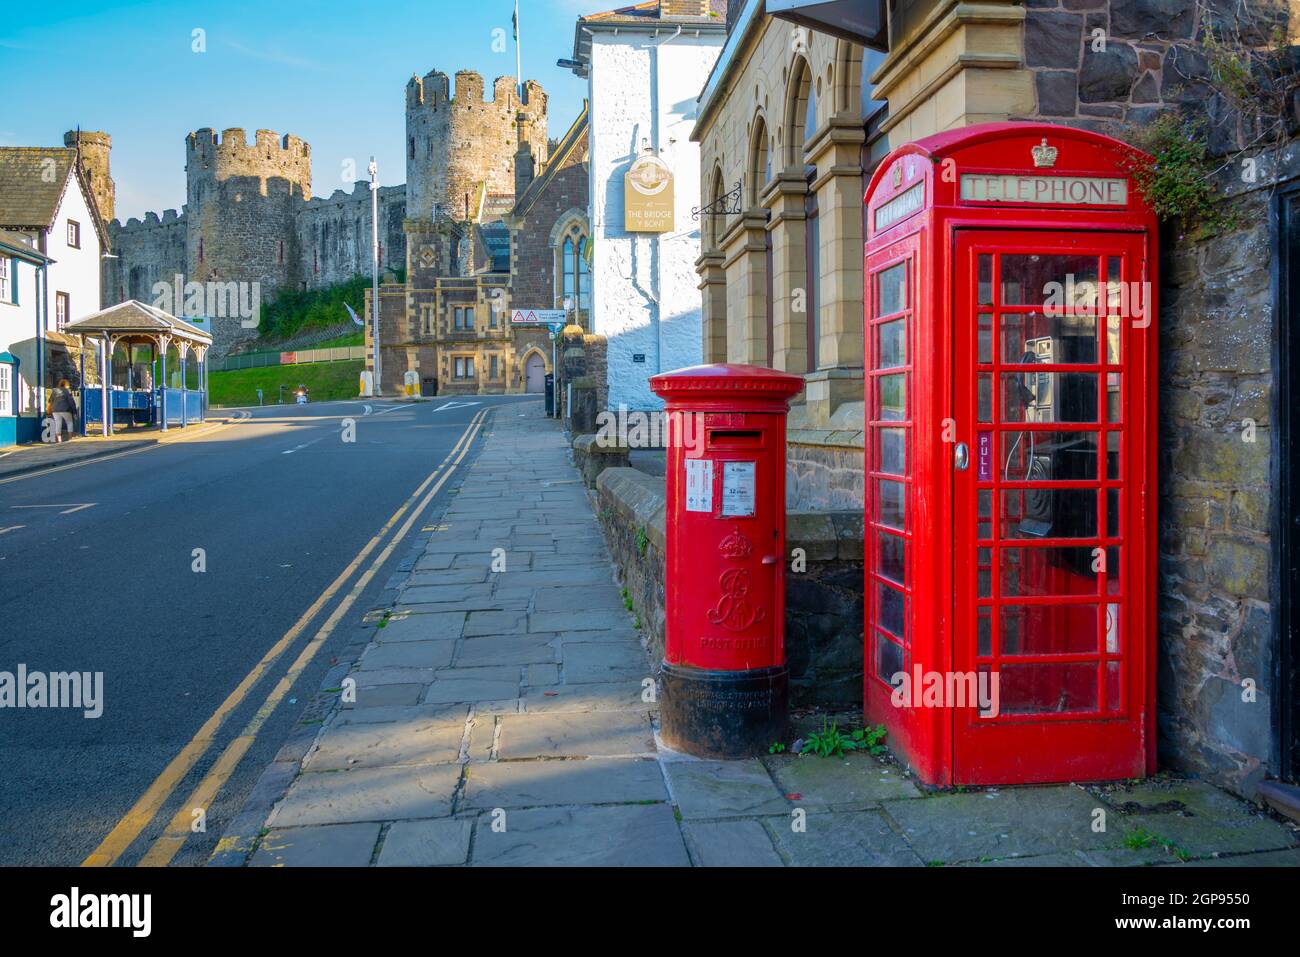 View of red telephone and post box with Conwy Castle visible in background, Conwy, Gwynedd, North Wales, United Kingdom, Europe Stock Photo